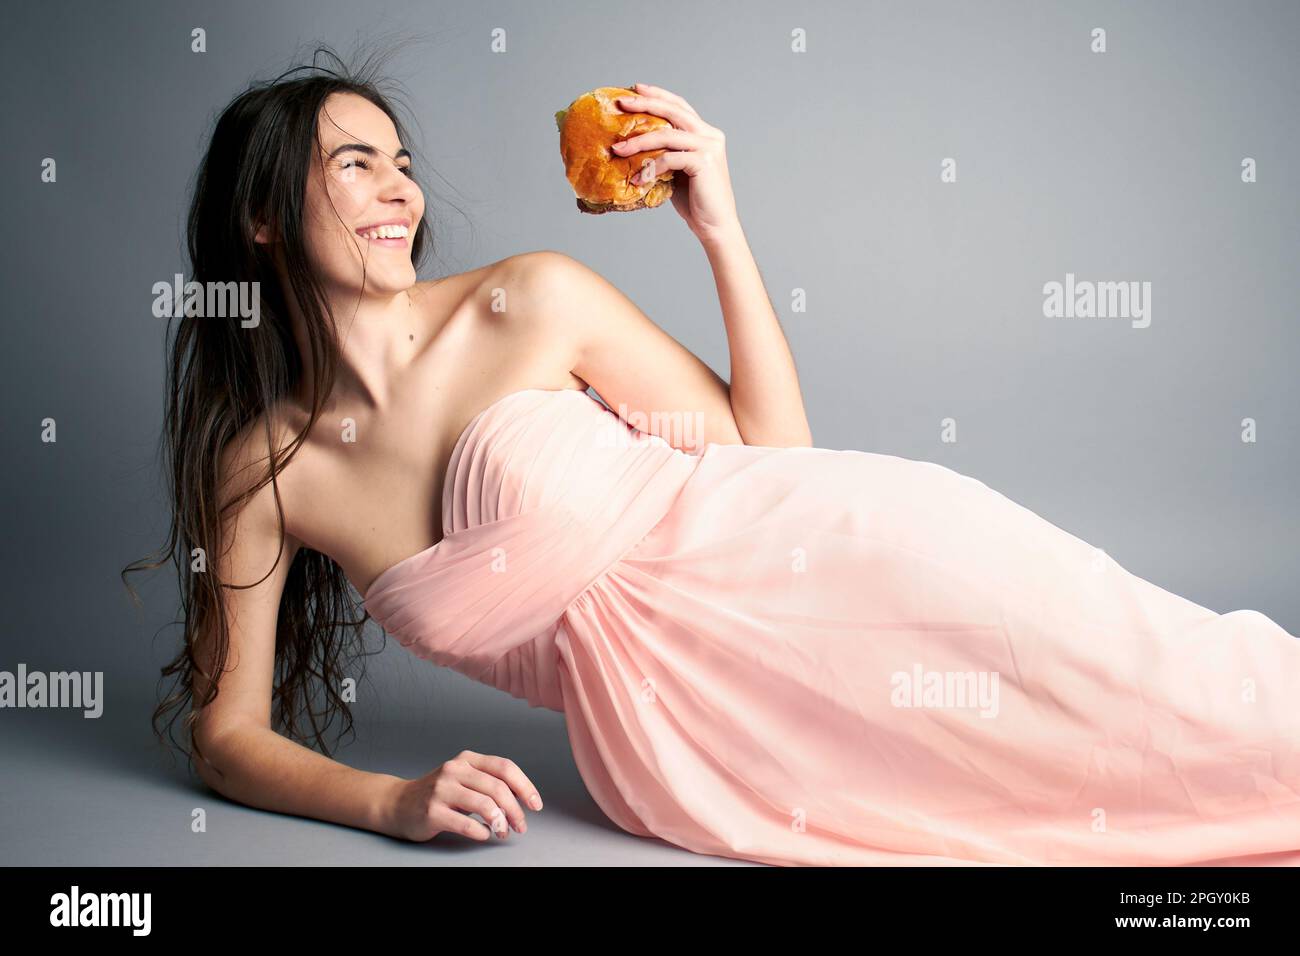 Woman in pink prom ballgown dress laying down on seamless grey paper background holding a hamburger Stock Photo